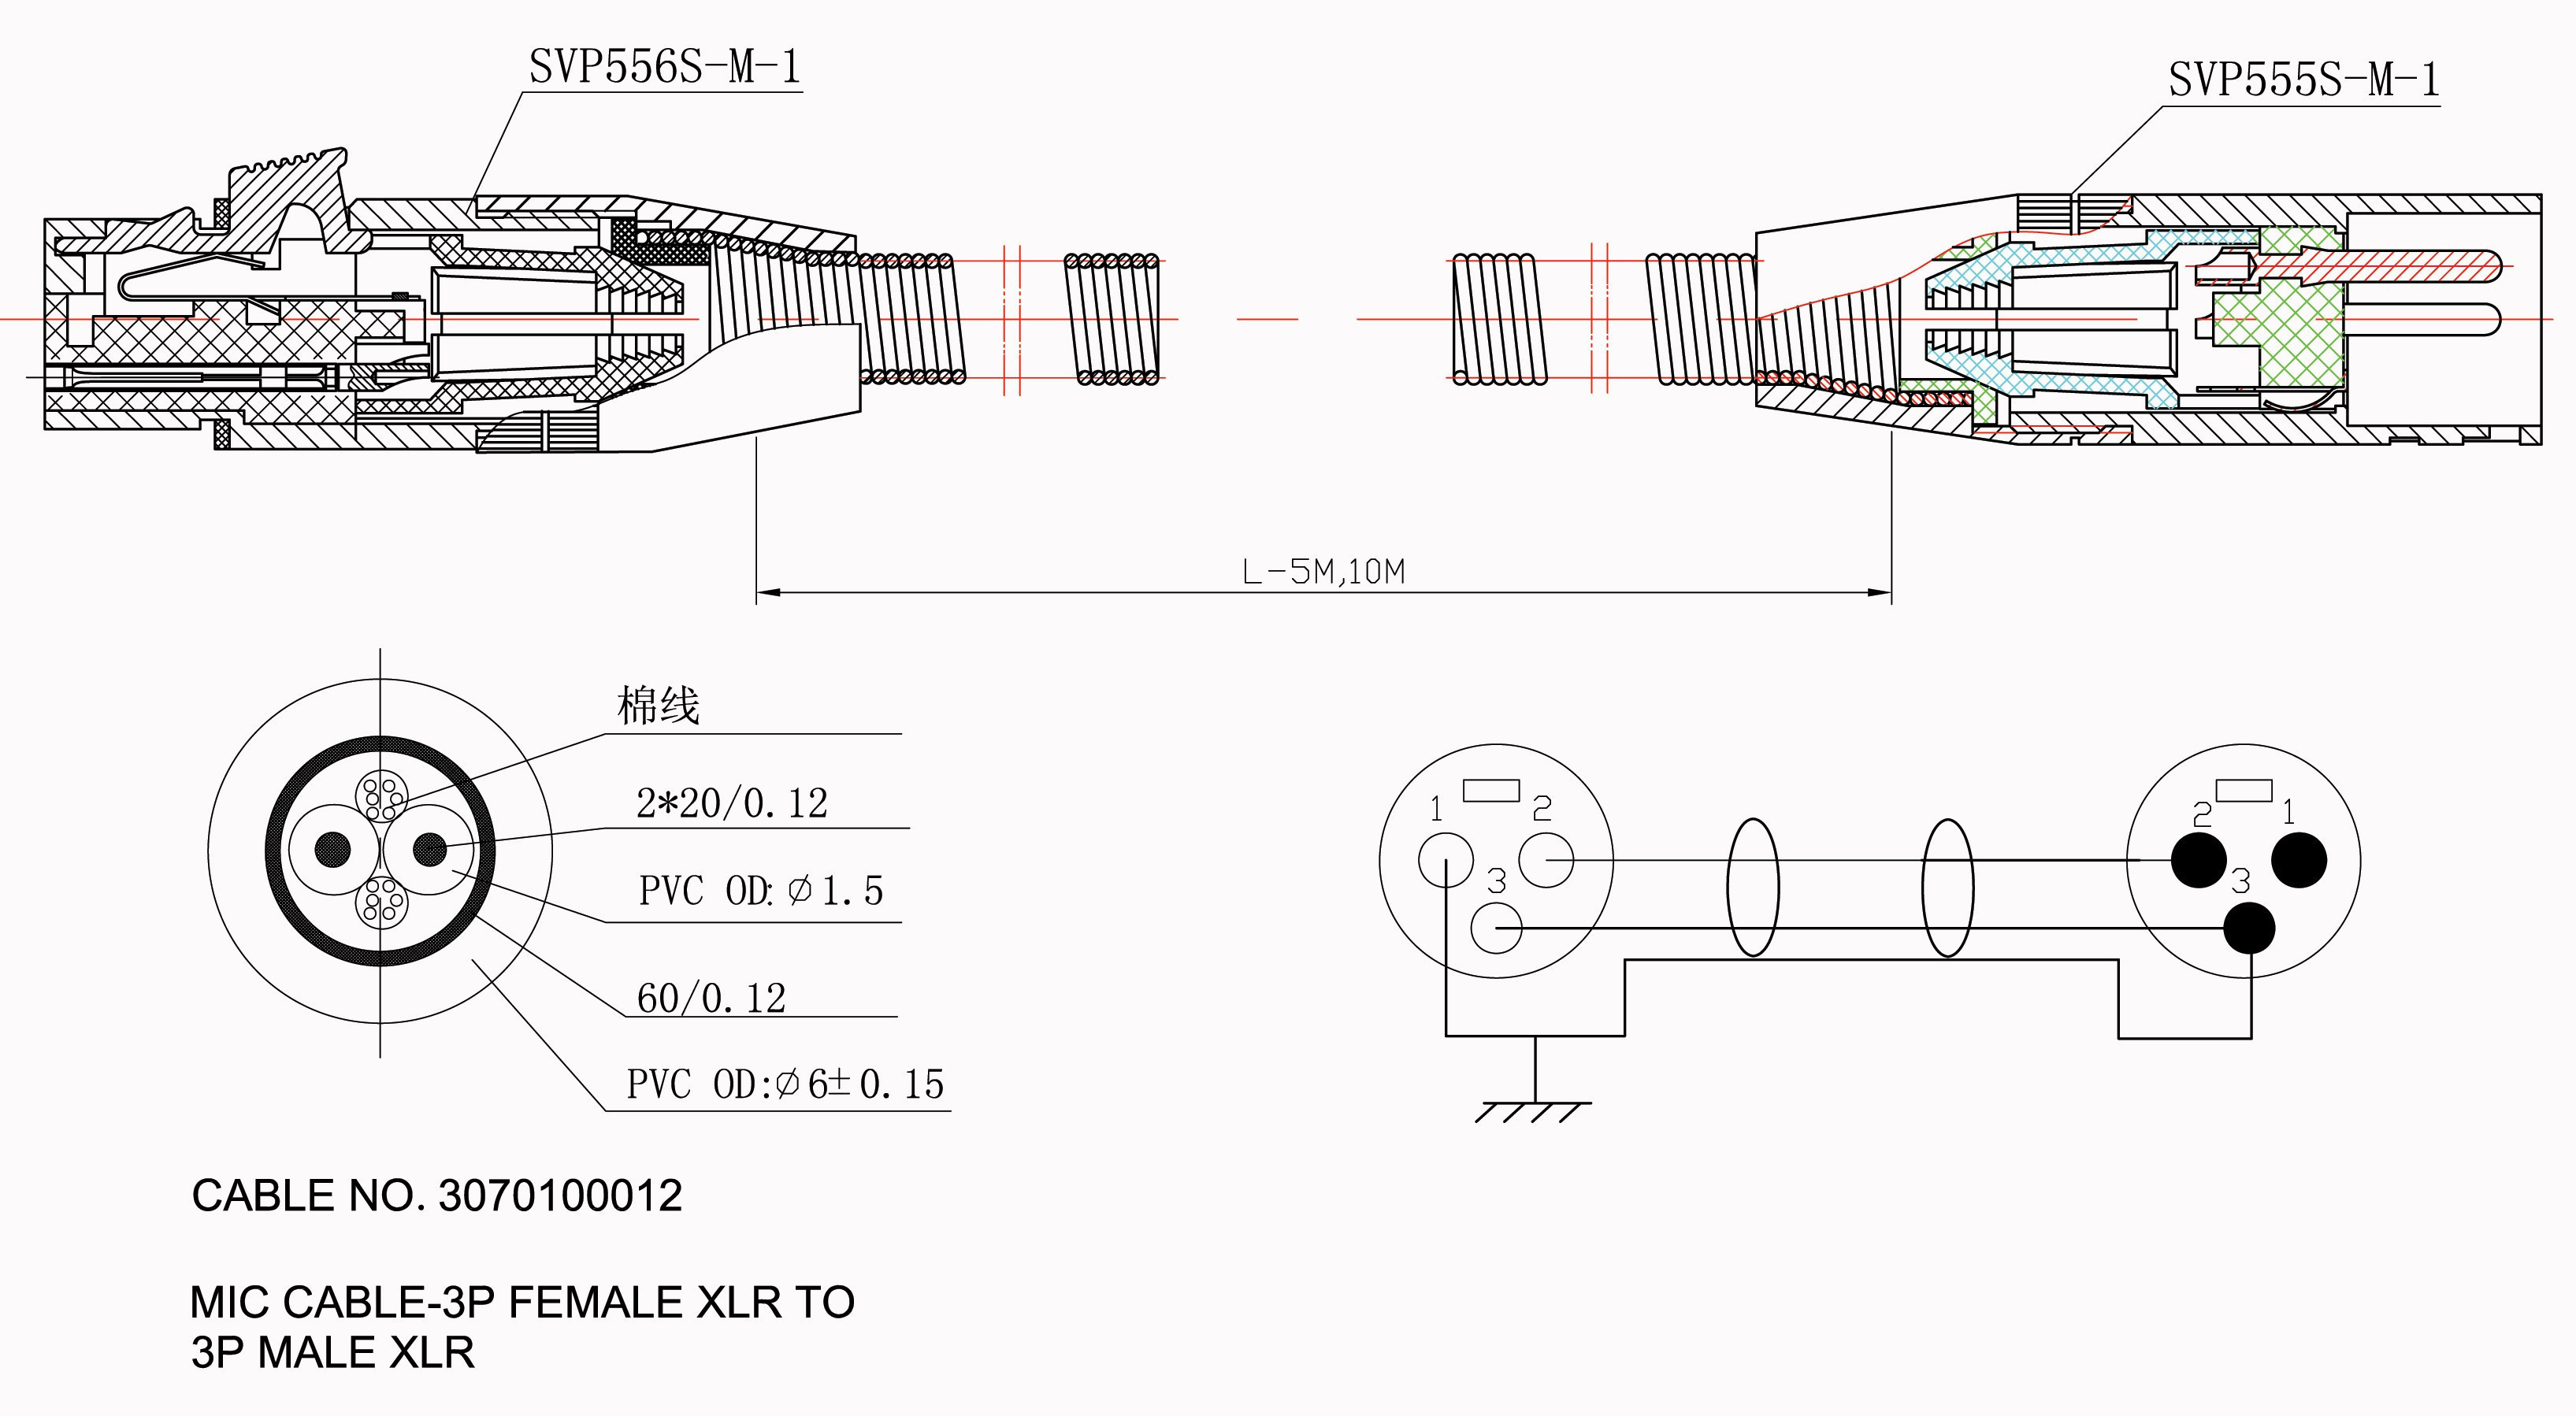 6 Channel Amp Wiring Diagram from 2020cadillac.com